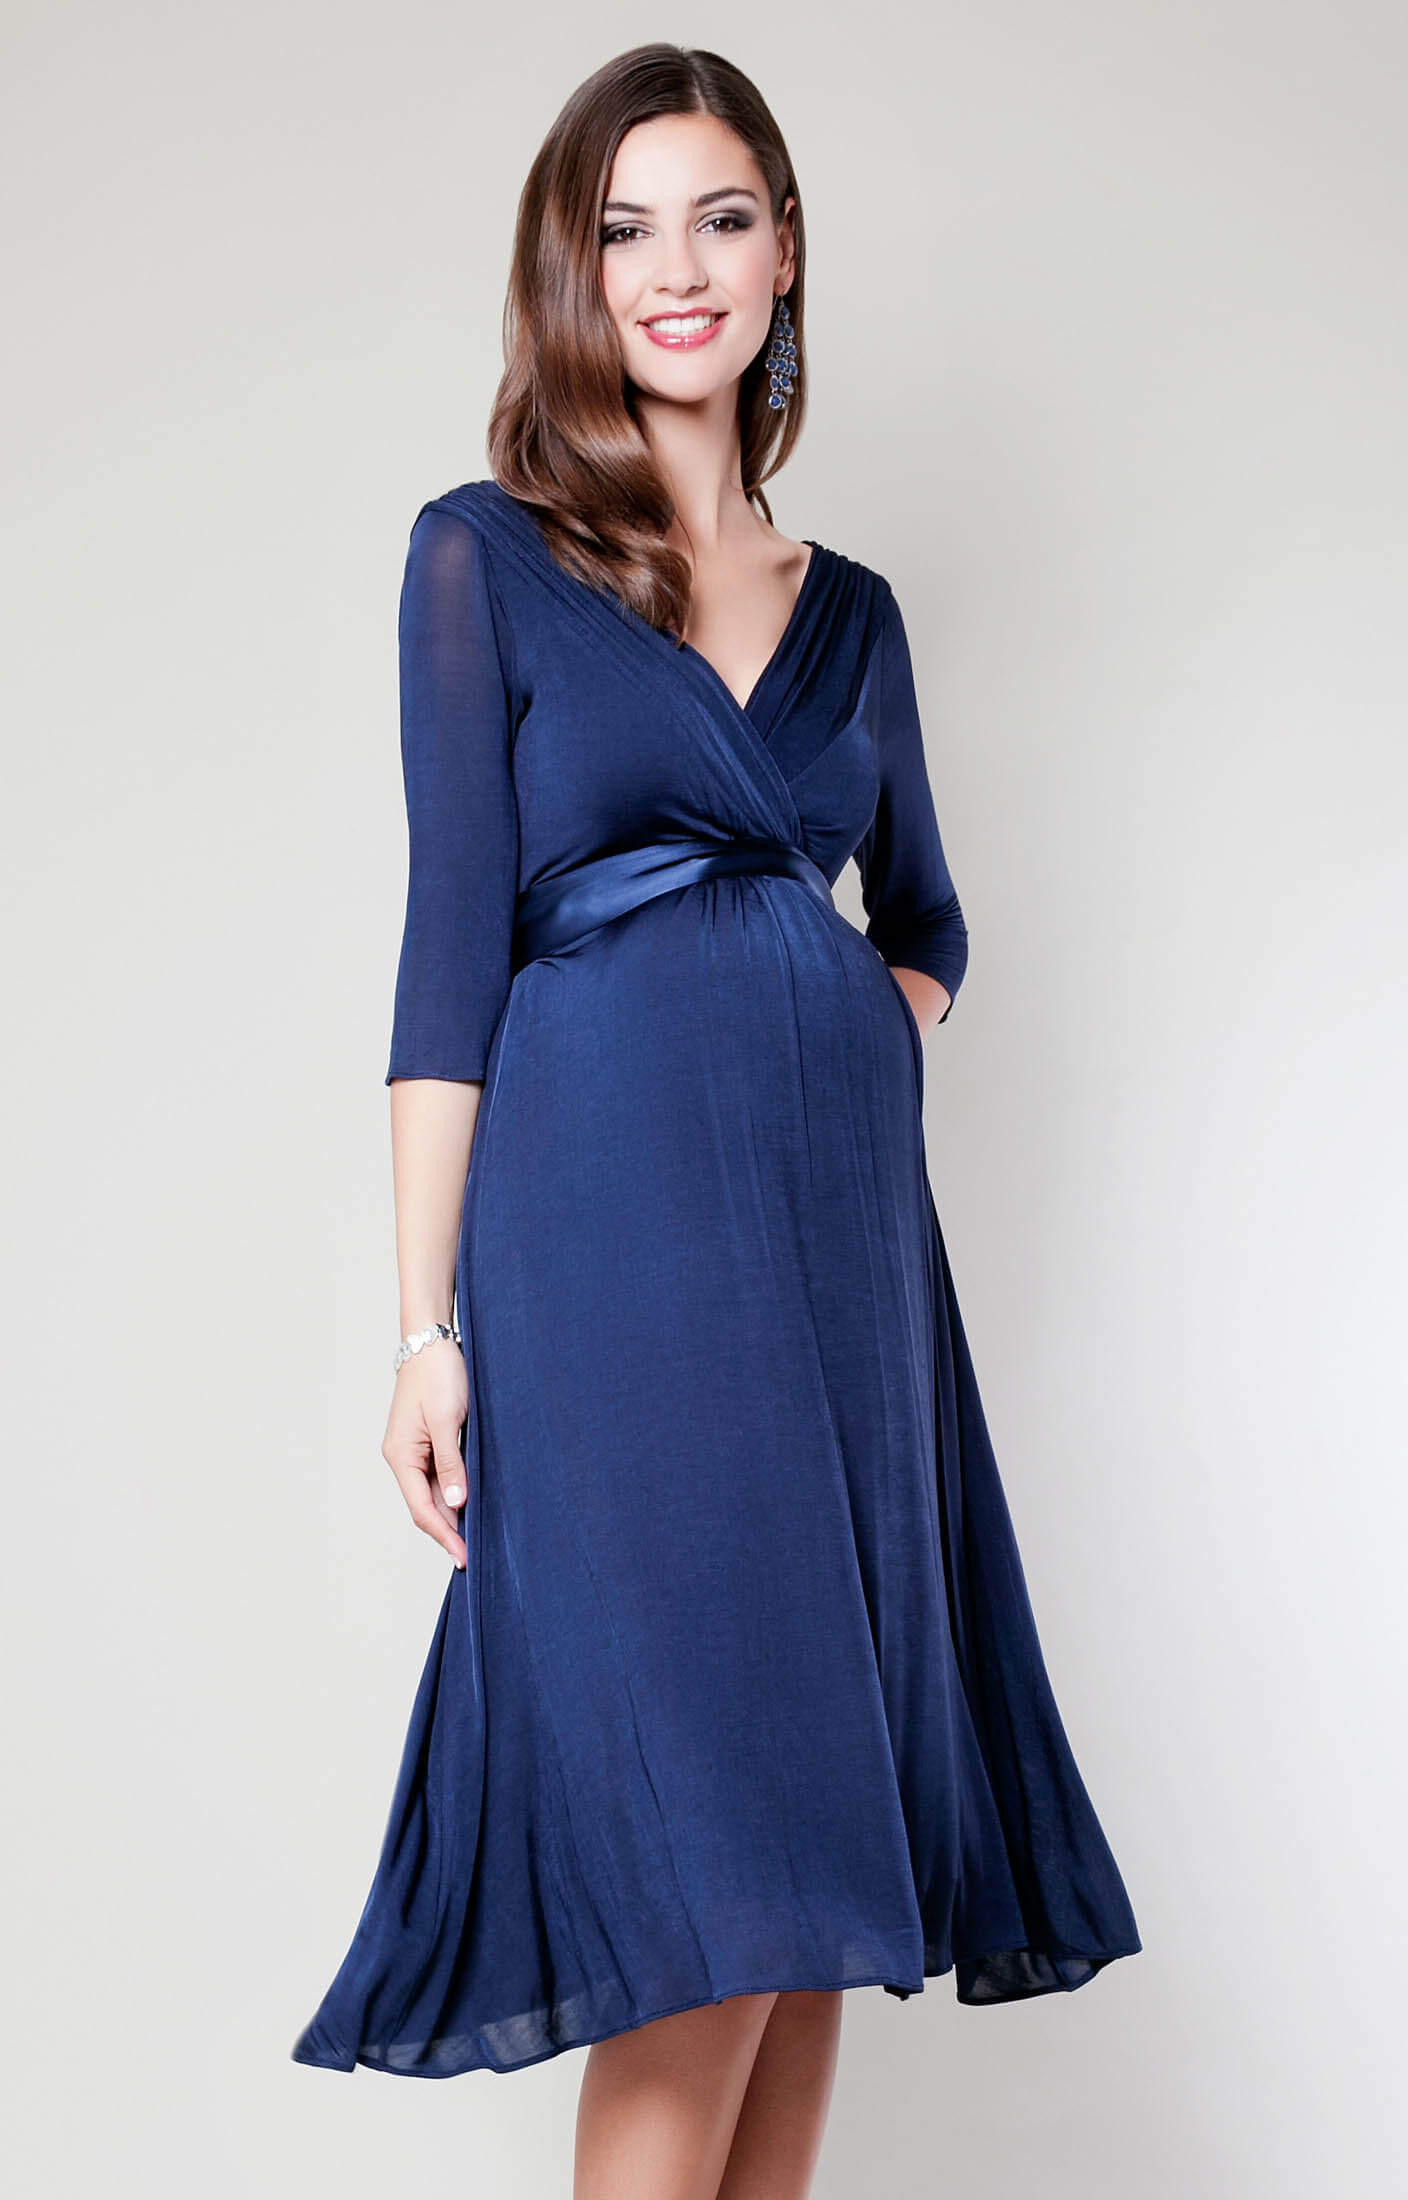 by Evening Party Willow and Dresses, (Midnight - Clothes Maternity Dress Blue) Rose Tiffany US Wear Wedding Maternity